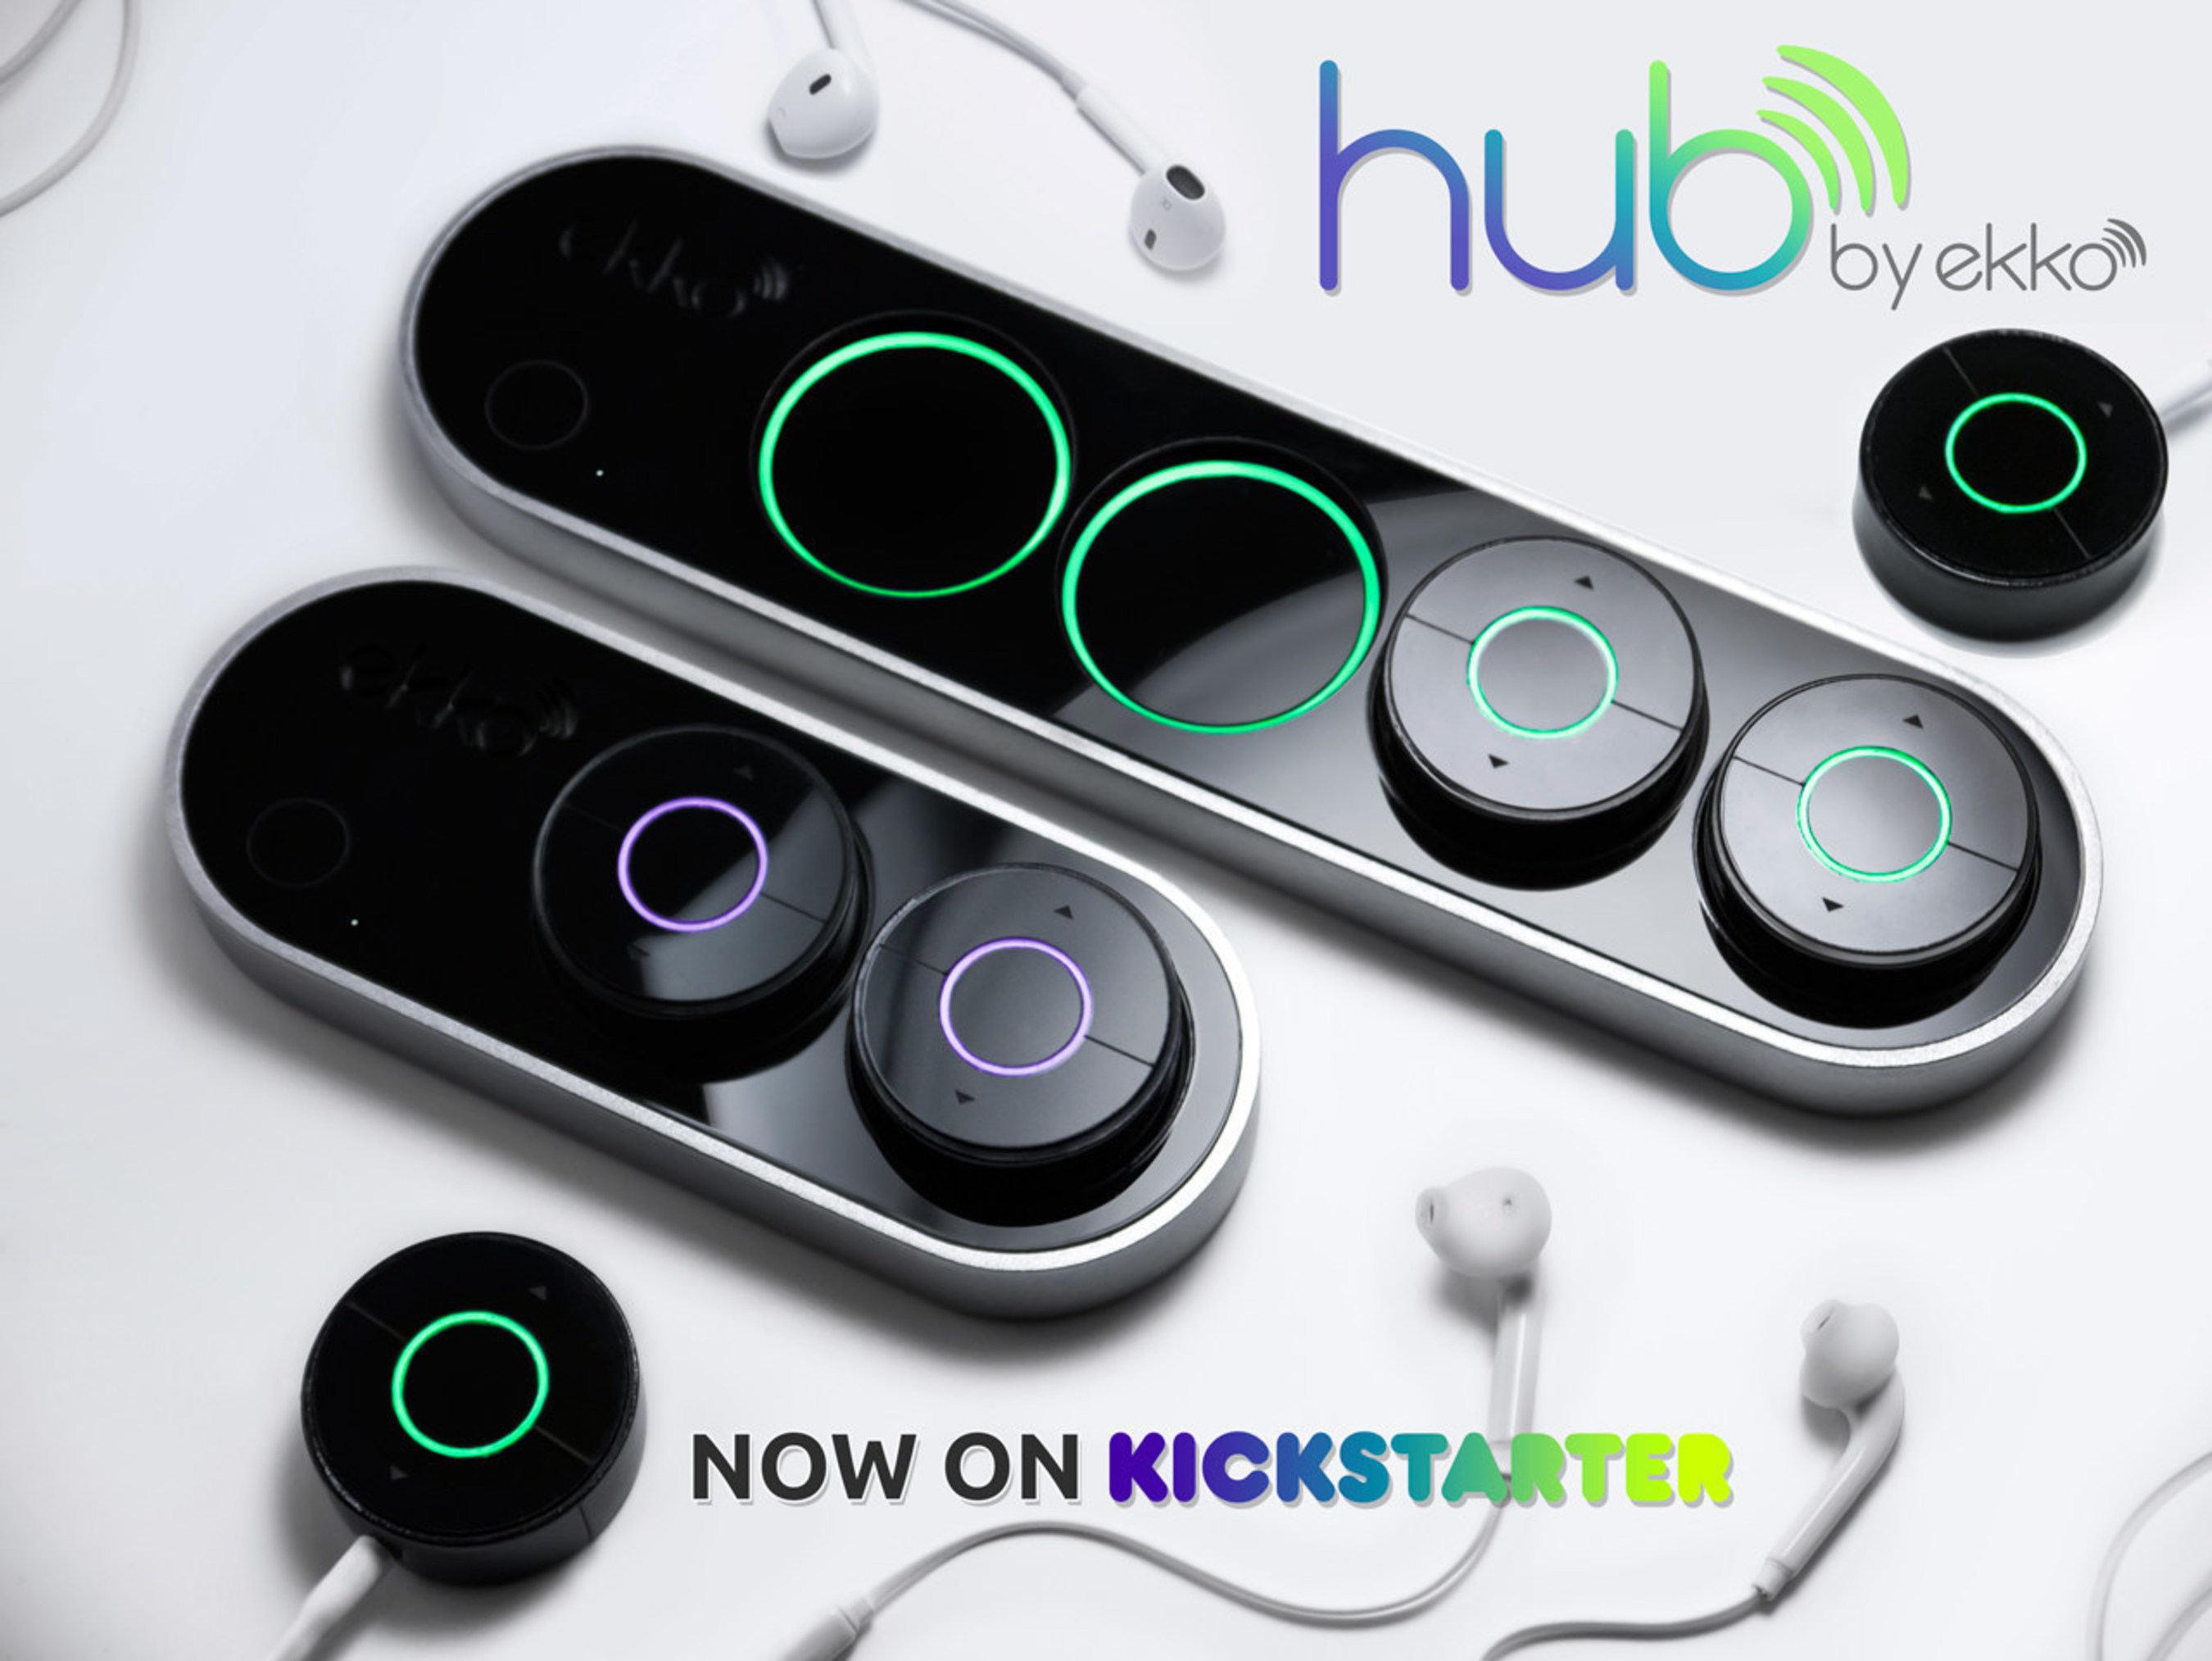 The world's first Hi-Fi, Wi-Fi audio hub for headphones and speakers. It lets you instantly share wireless audio with multiple simultaneous listeners using any earbuds, headphones or powered speakers.